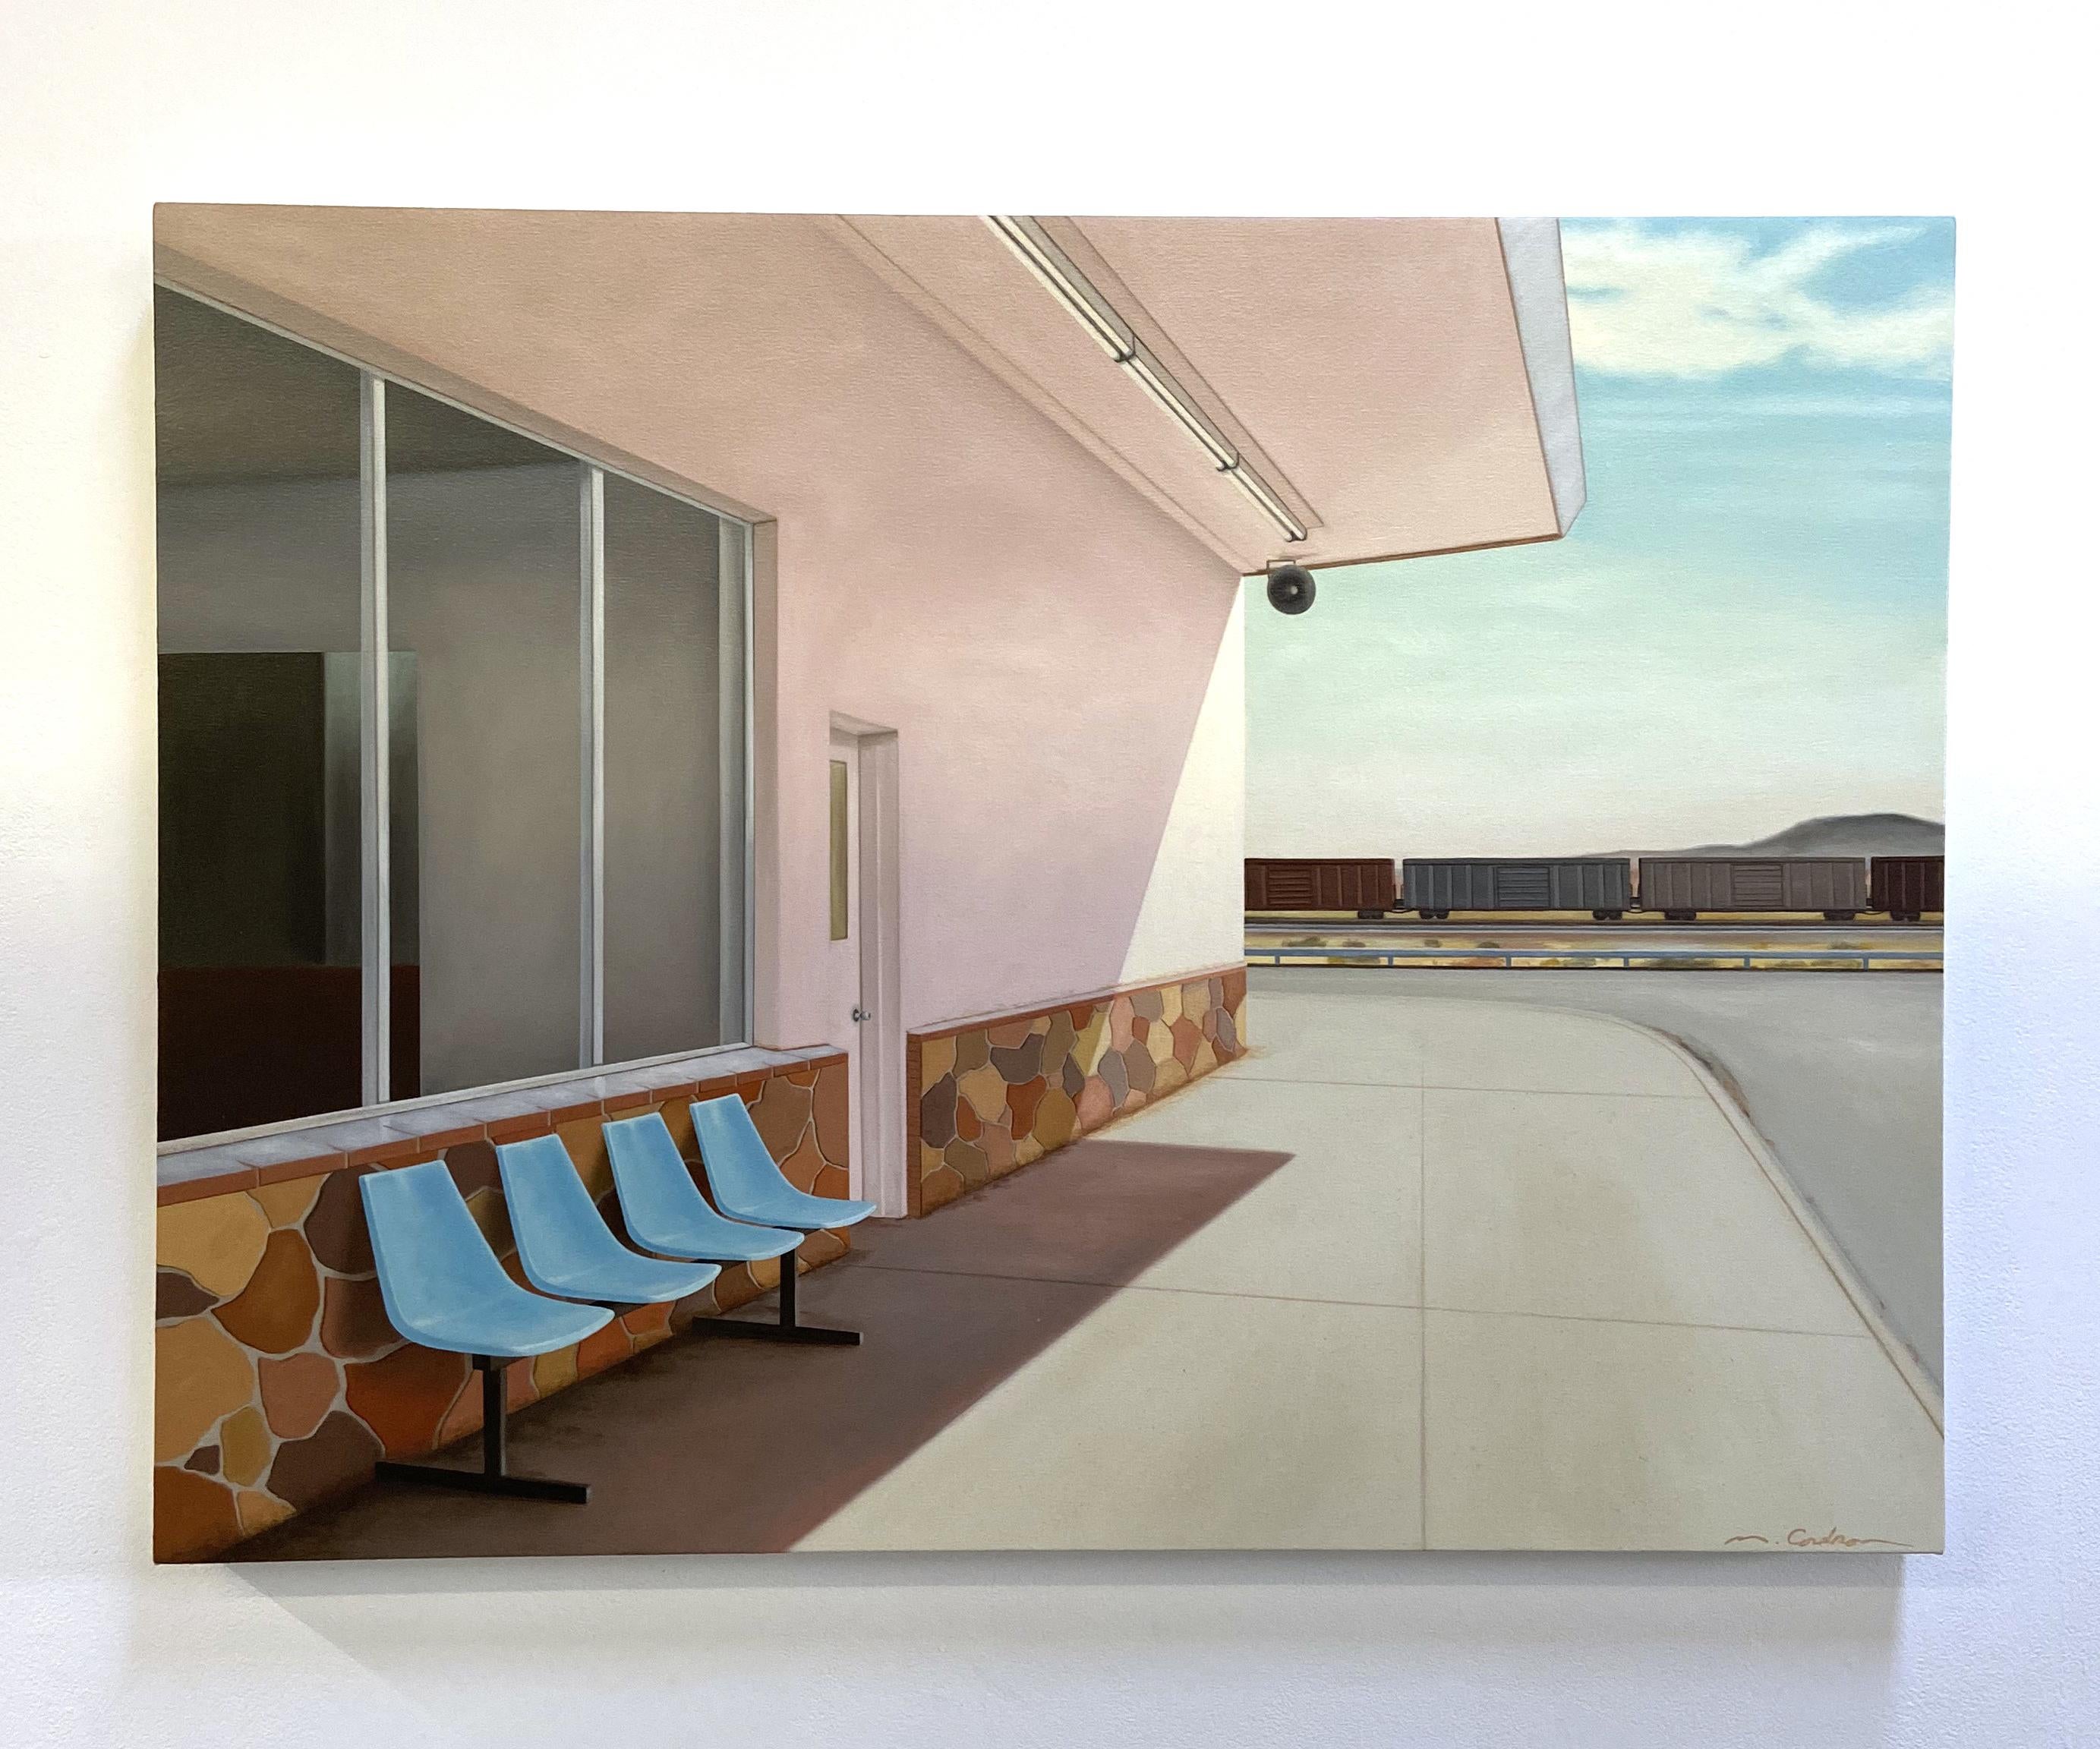 Southwest Station - Painting by Matt Condron